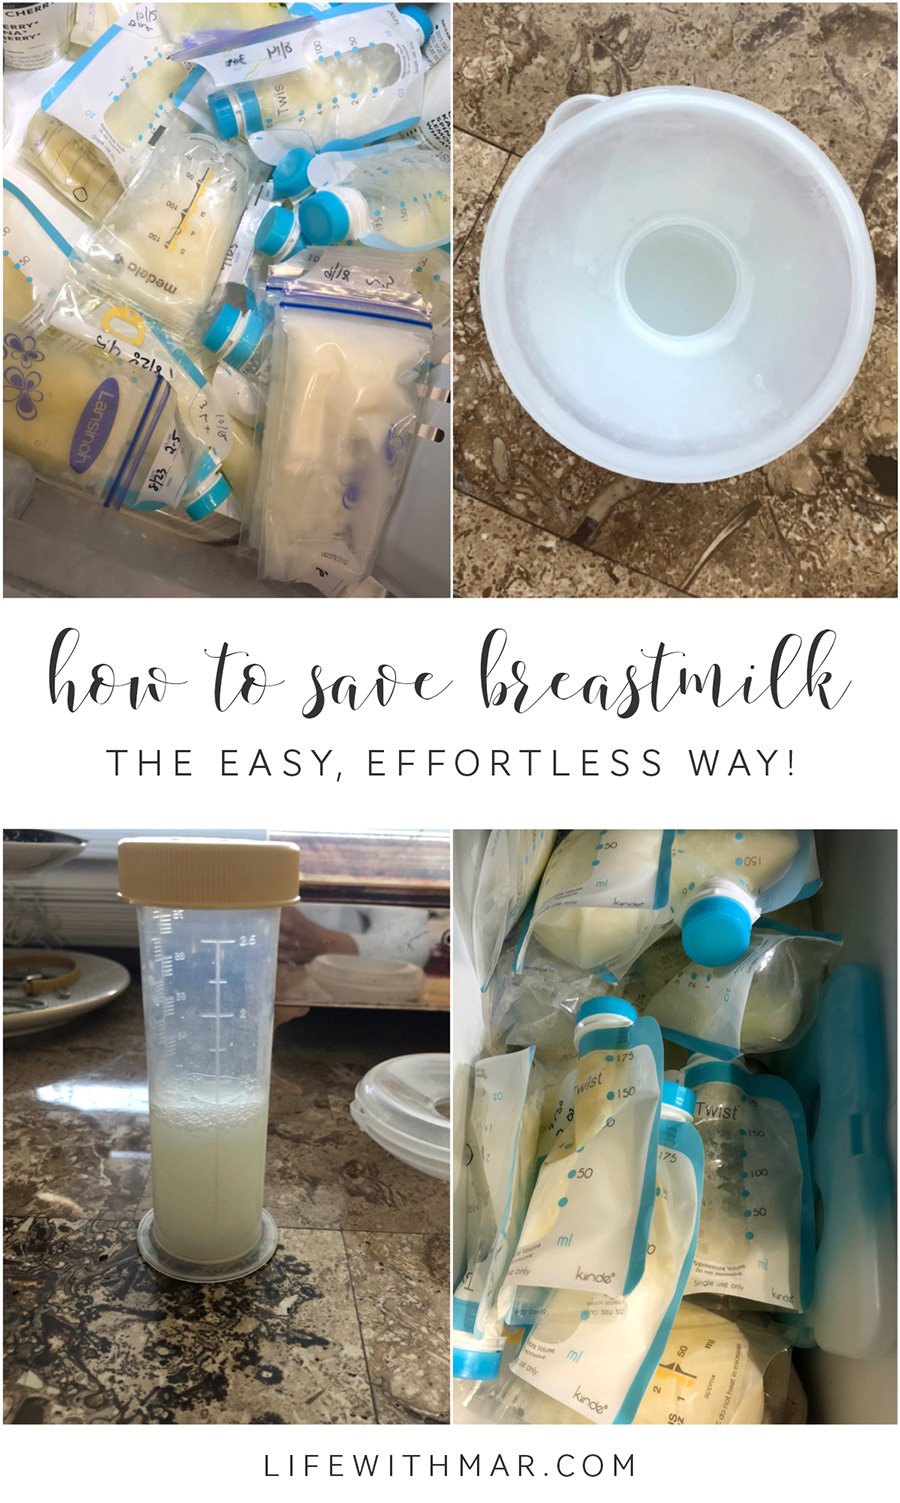 lacti cups review, the easiest way to save breastmilk every with seriously no effort! 